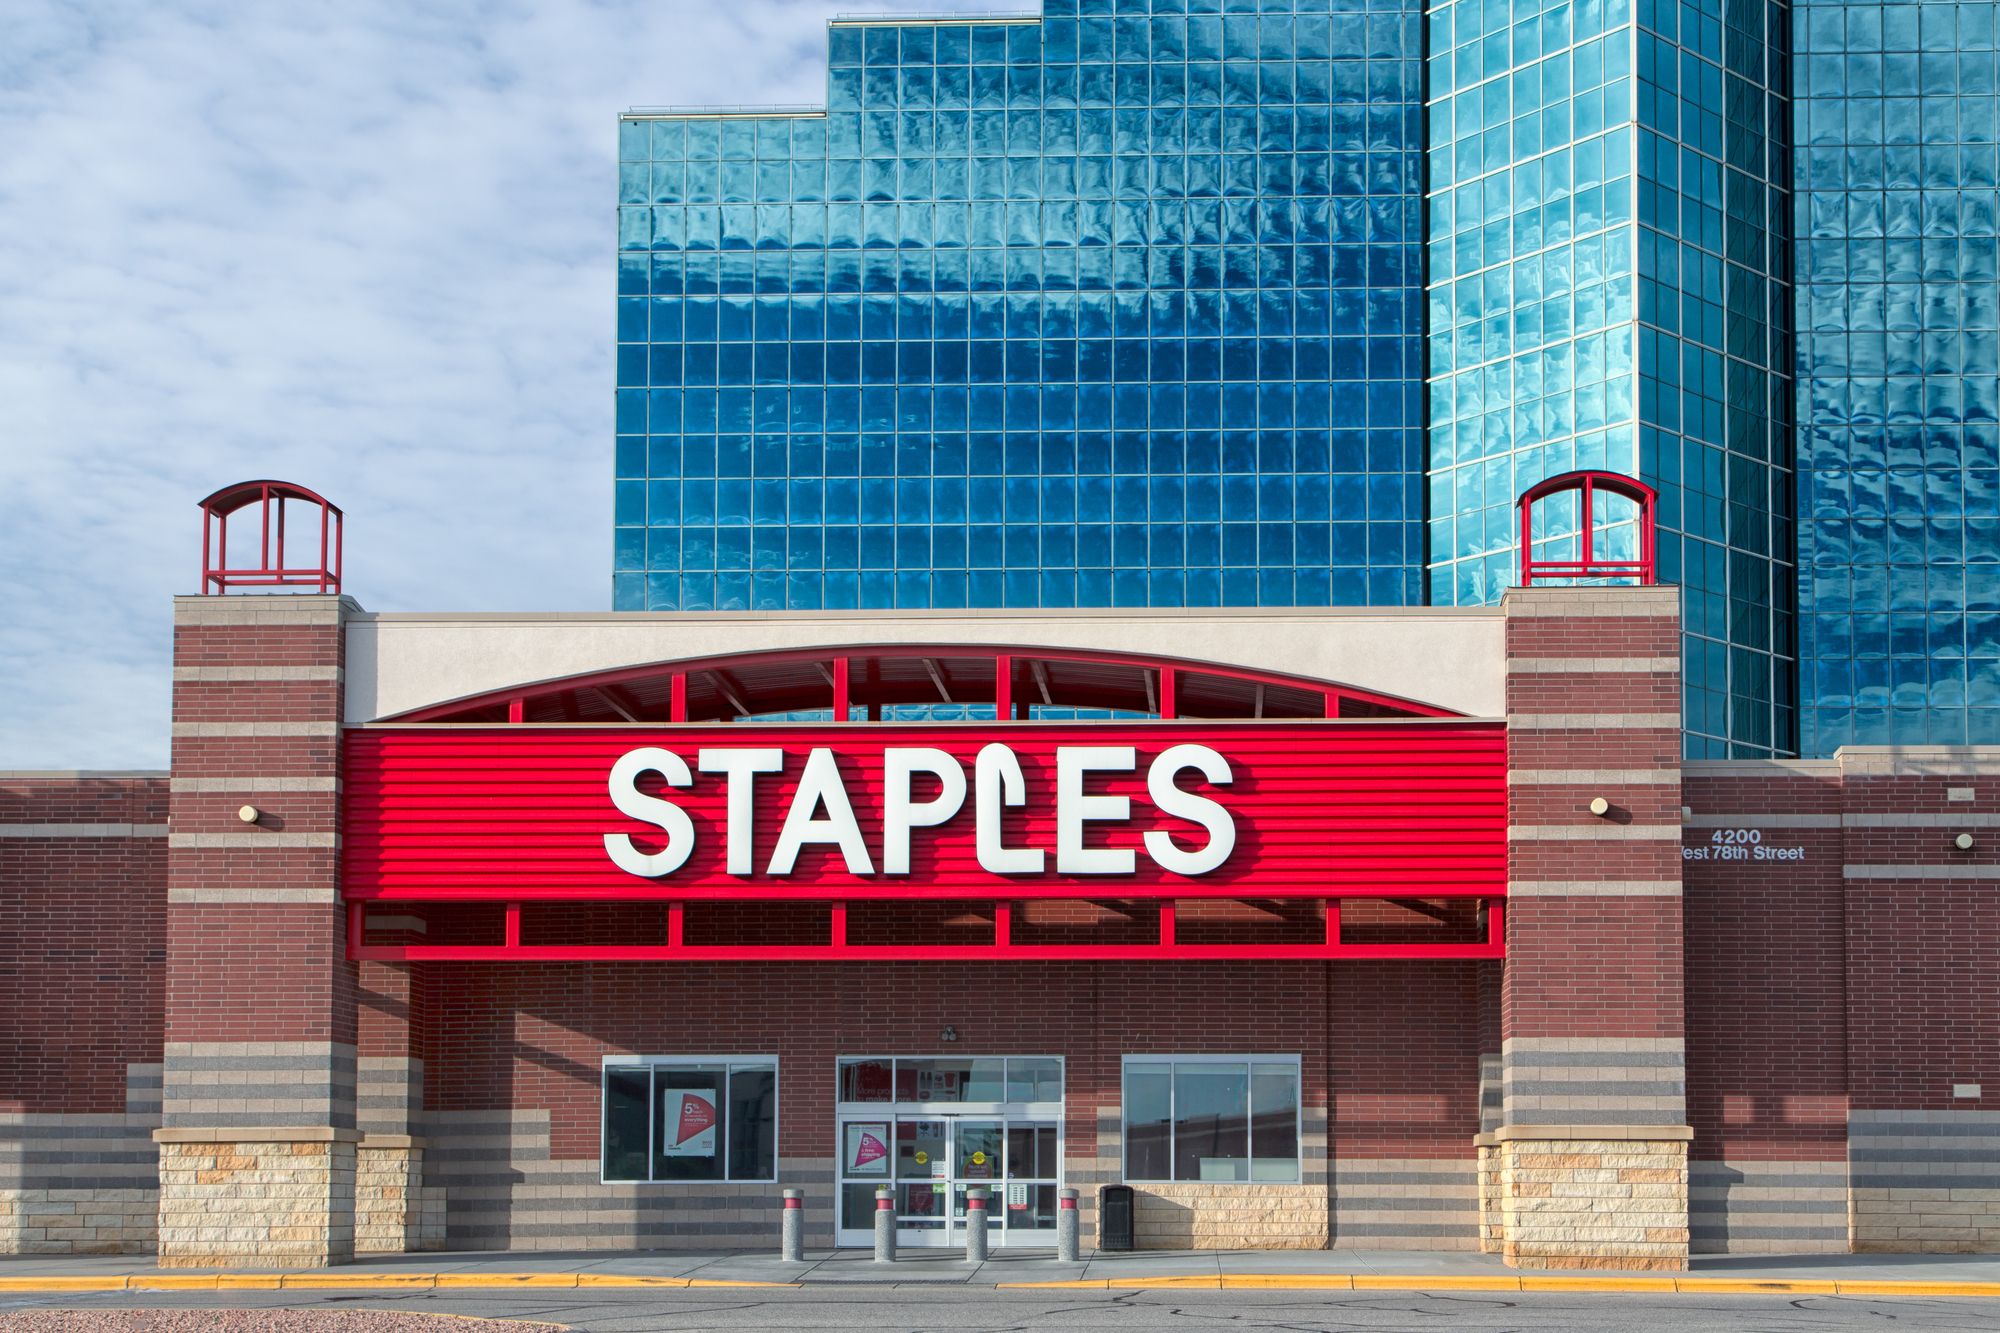 BLOOMINGTON, MN/USA - JUNE 22, 2014: Staples office supply store exterior. Staples, Inc. sells supplies, office machines, promotional products, furniture, technology, and business services in stores and online.